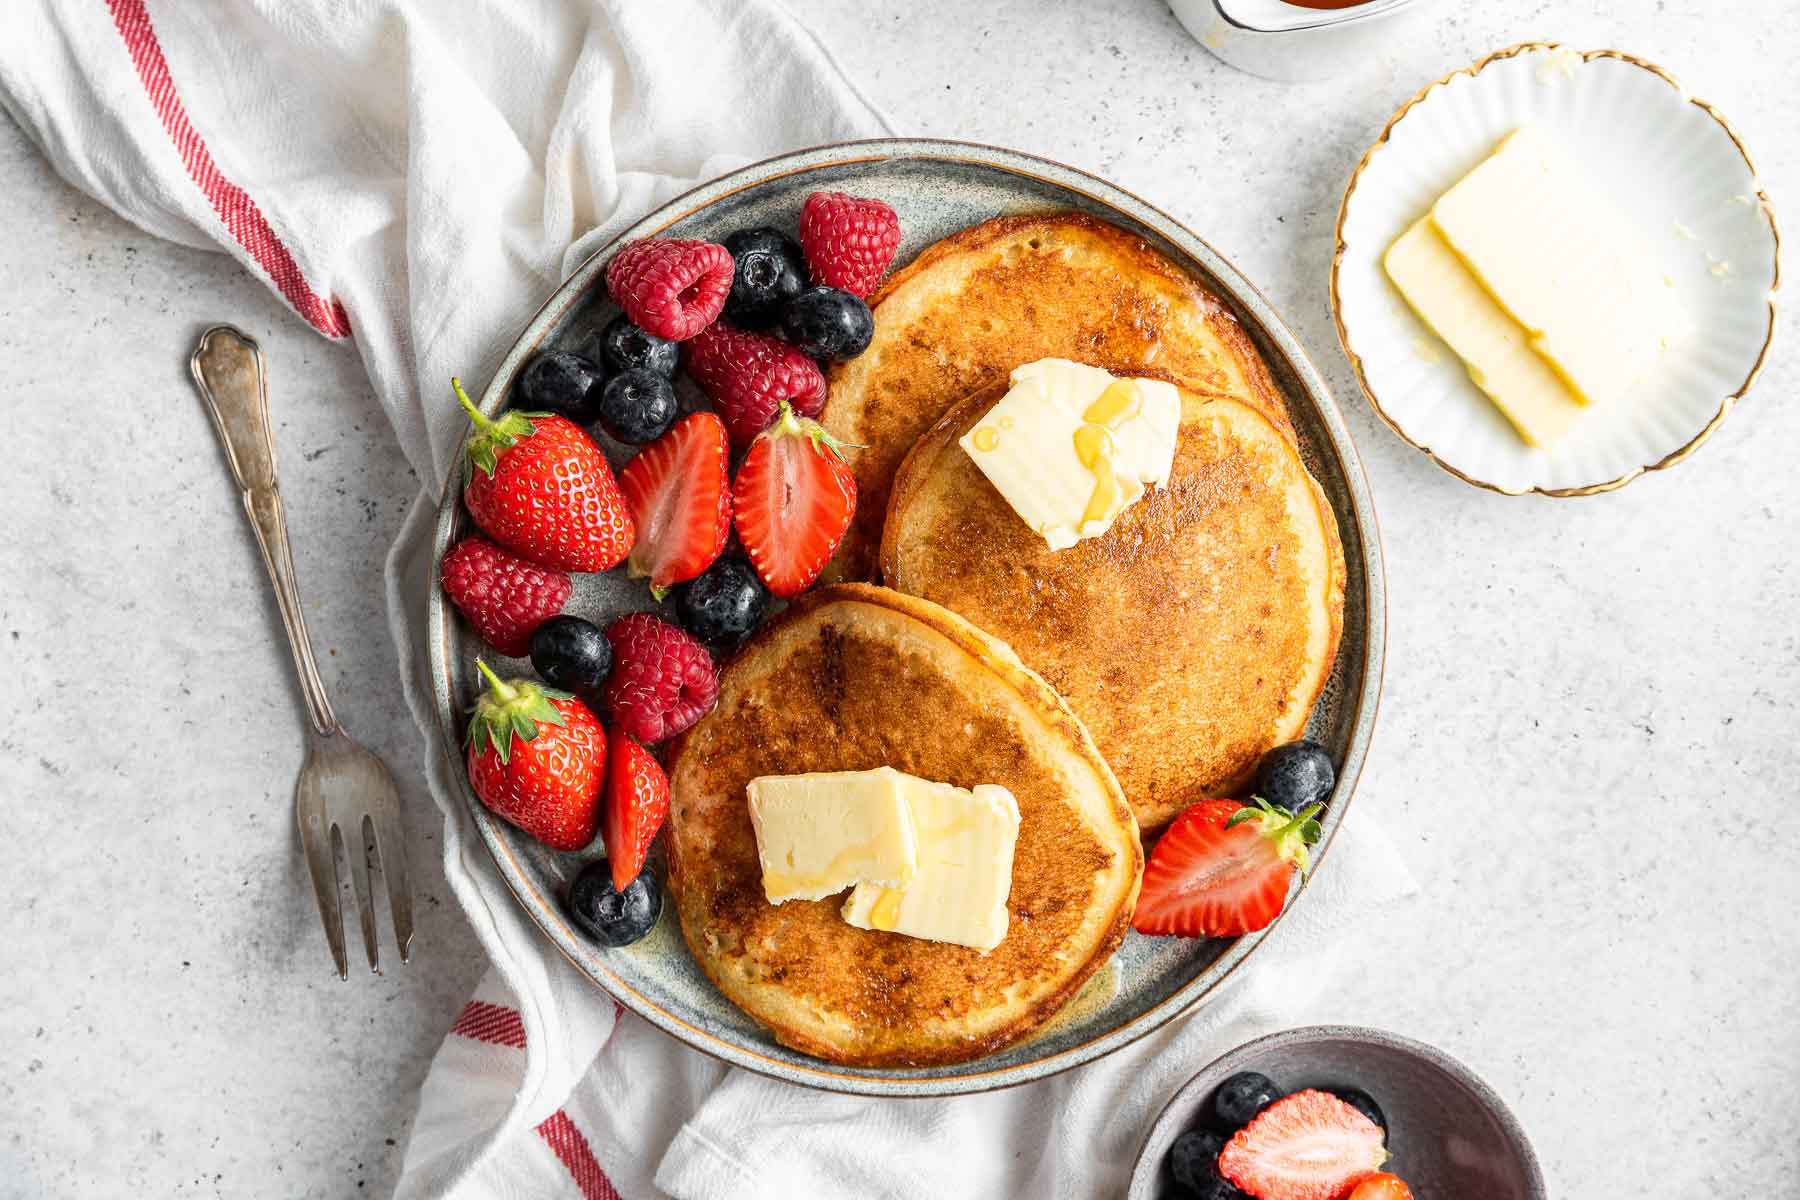 Plate of pancakes topped with butter and fresh berries.